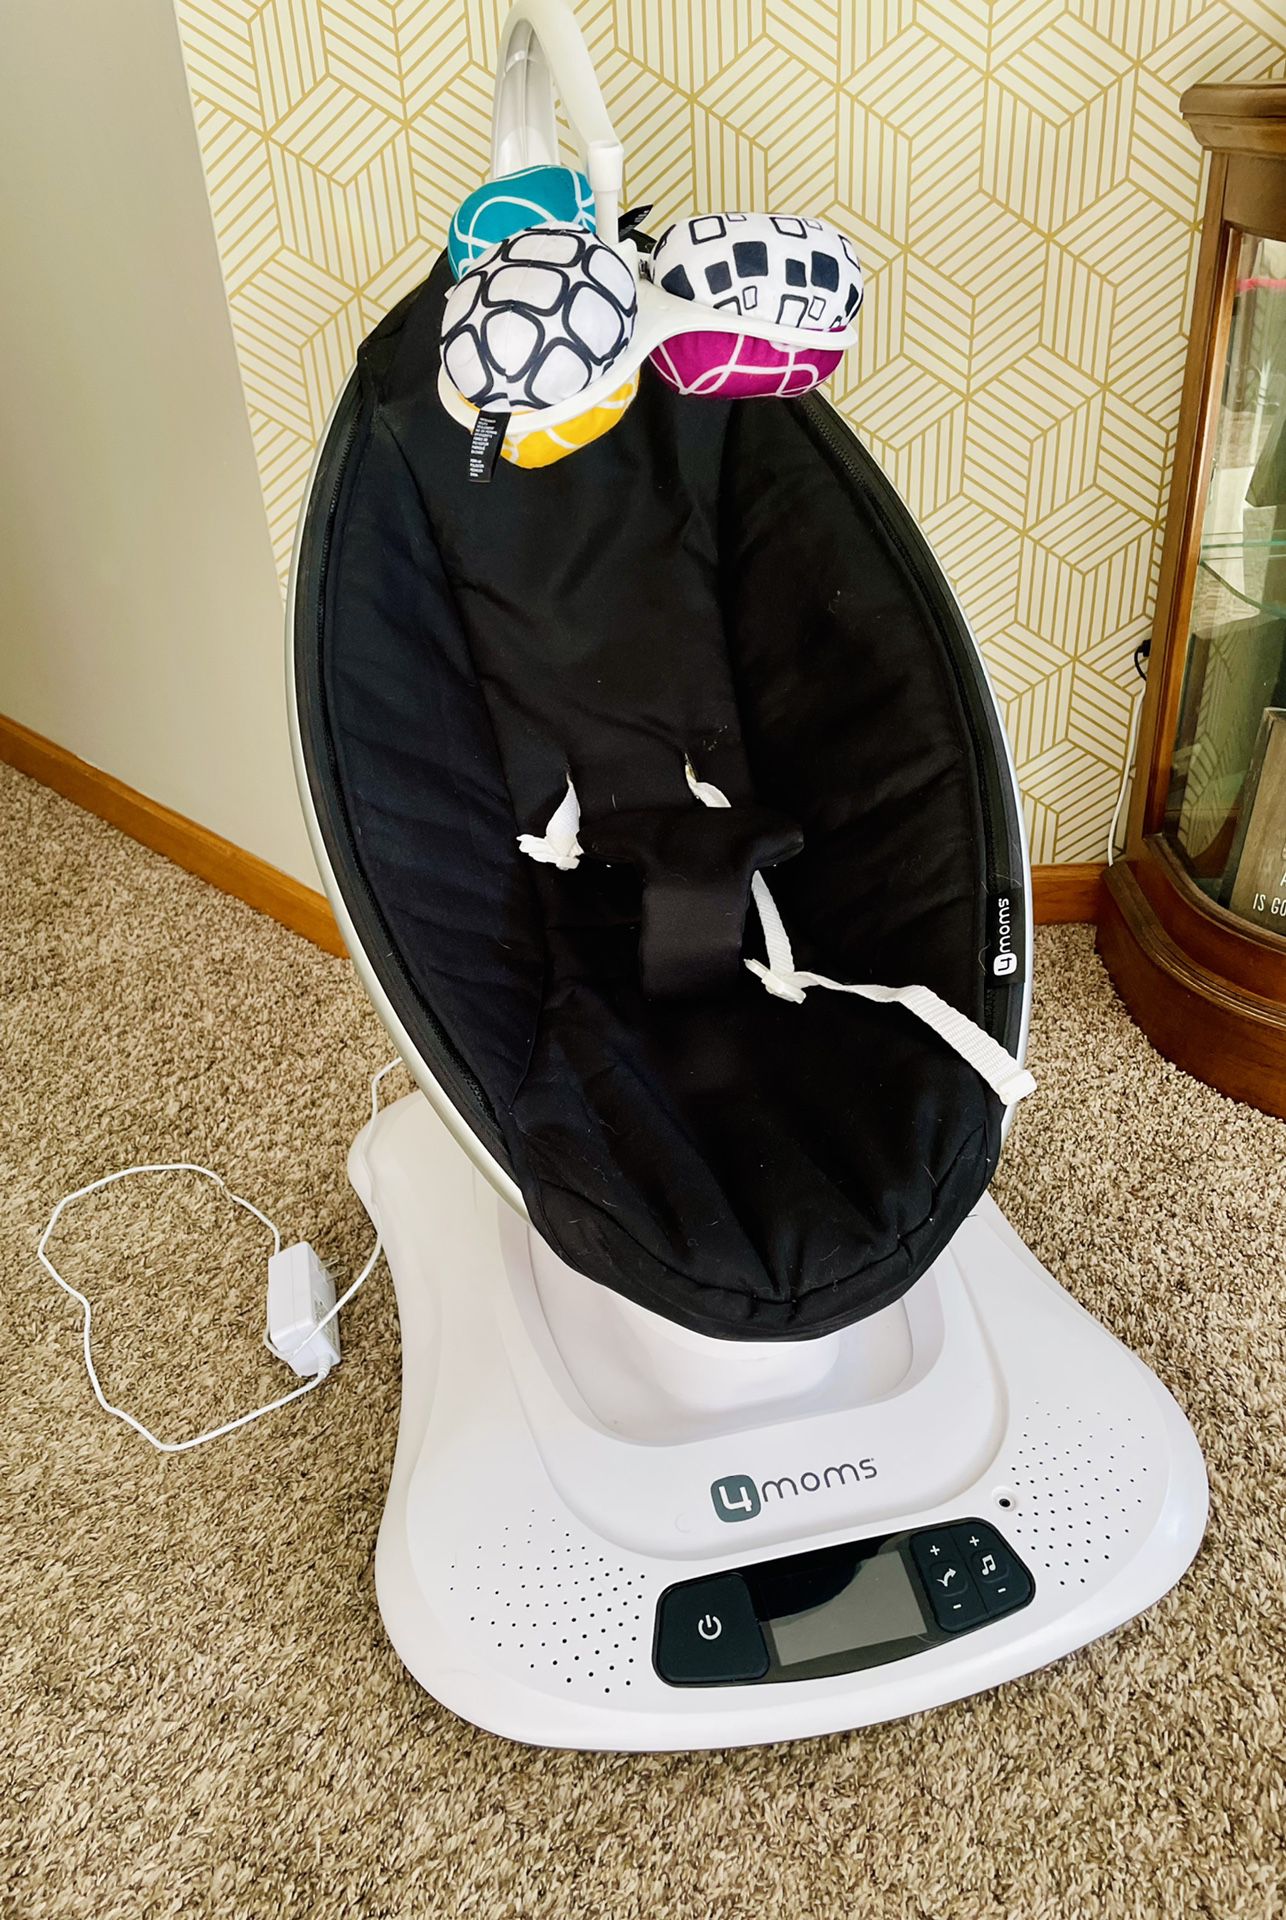 4Moms Mamaroo Baby Swing - Barely Used (Firm On Price)